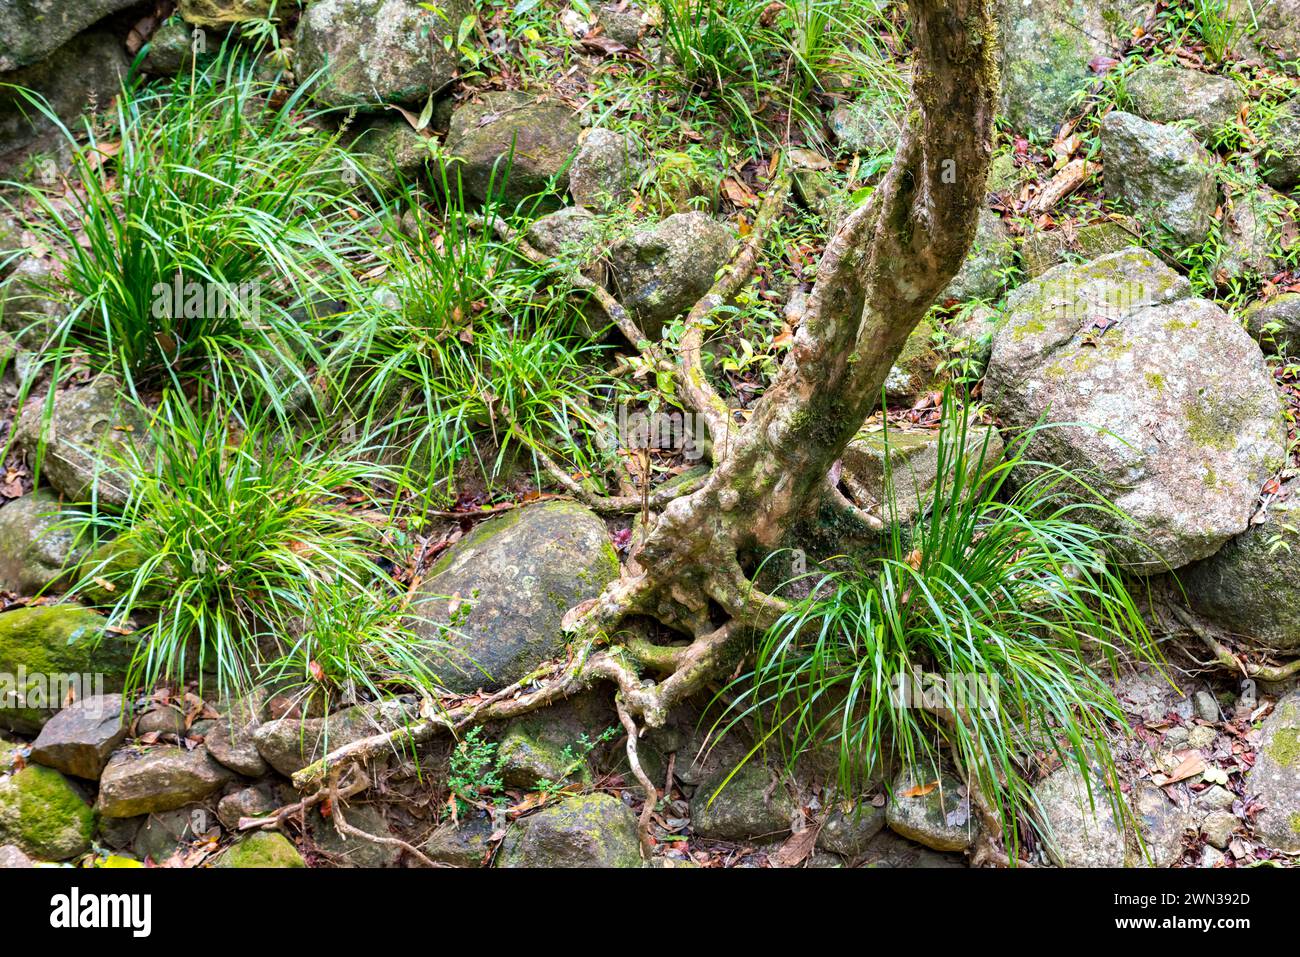 A tree and some native grasses still thrive in the largely infertile soils but high rainfall of the rainforest understory in Mossman Gorge, Queensland Stock Photo